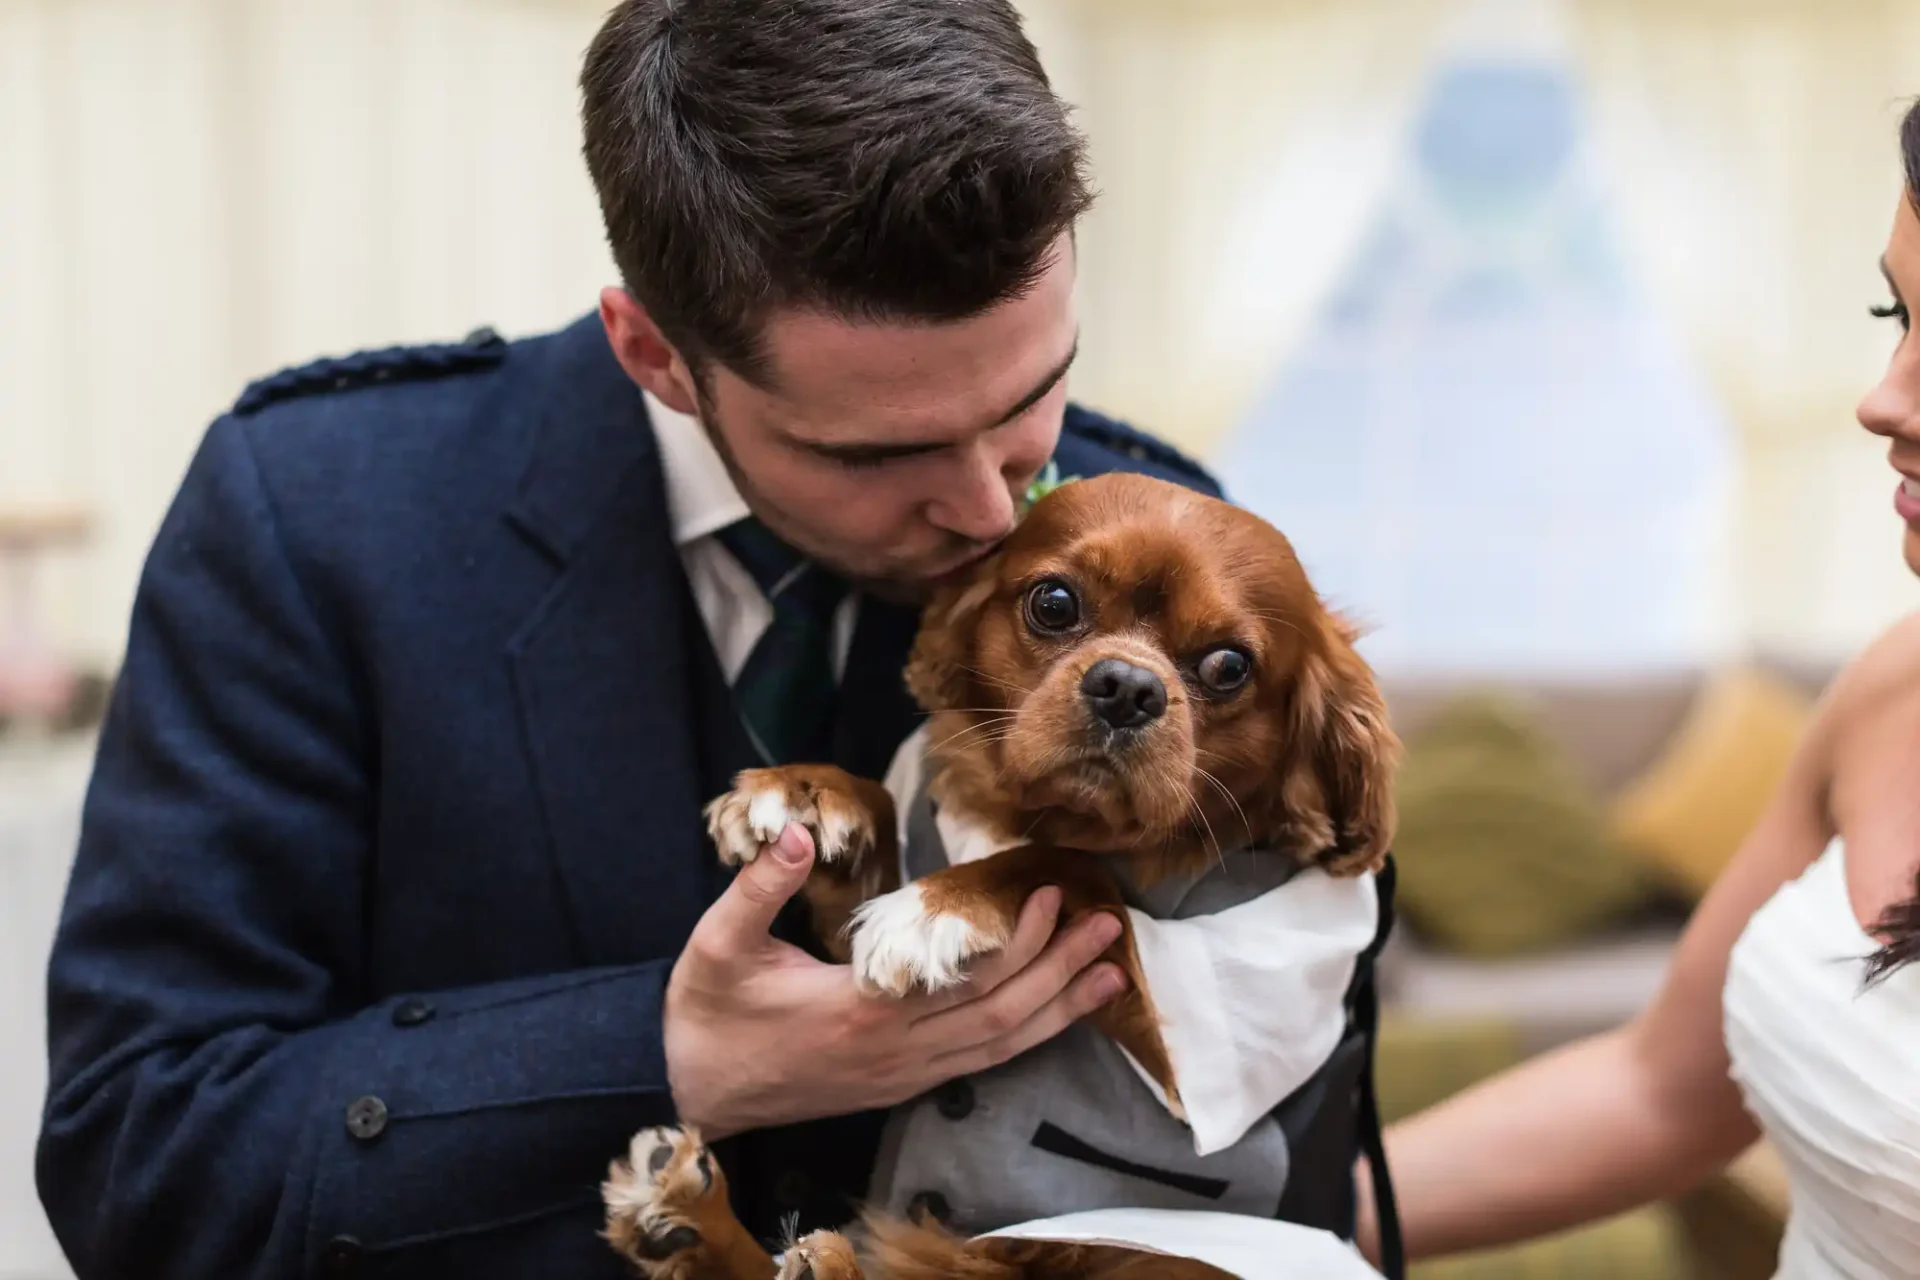 Groom in a suit kisses a brown and white cavalier king charles spaniel held by a bride in a white dress.